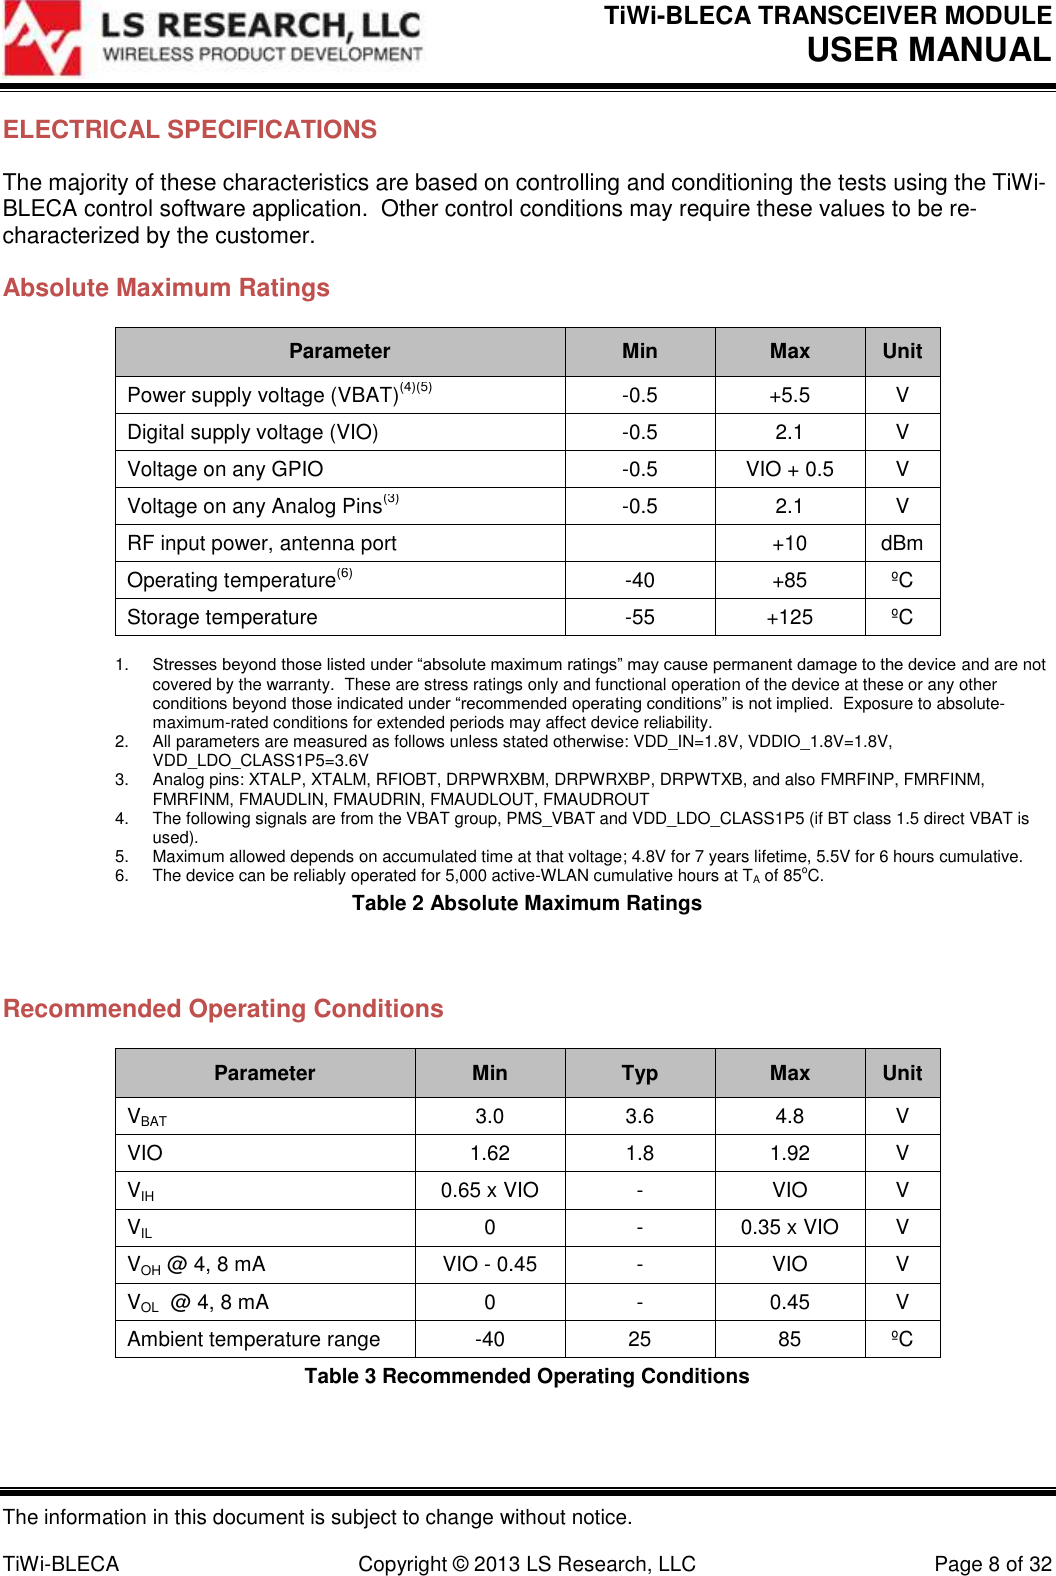 TiWi-BLECA TRANSCEIVER MODULE USER MANUAL   The information in this document is subject to change without notice.  TiWi-BLECA  Copyright © 2013 LS Research, LLC  Page 8 of 32 ELECTRICAL SPECIFICATIONS The majority of these characteristics are based on controlling and conditioning the tests using the TiWi-BLECA control software application.  Other control conditions may require these values to be re-characterized by the customer. Absolute Maximum Ratings Parameter Min Max Unit Power supply voltage (VBAT)(4)(5) -0.5 +5.5 V Digital supply voltage (VIO) -0.5 2.1 V Voltage on any GPIO -0.5 VIO + 0.5 V Voltage on any Analog Pins(3) -0.5 2.1 V RF input power, antenna port  +10 dBm Operating temperature(6) -40 +85 ºC Storage temperature -55 +125 ºC  1. Stresses beyond those listed under “absolute maximum ratings” may cause permanent damage to the device and are not covered by the warranty.  These are stress ratings only and functional operation of the device at these or any other conditions beyond those indicated under “recommended operating conditions” is not implied.  Exposure to absolute-maximum-rated conditions for extended periods may affect device reliability. 2.  All parameters are measured as follows unless stated otherwise: VDD_IN=1.8V, VDDIO_1.8V=1.8V, VDD_LDO_CLASS1P5=3.6V 3.  Analog pins: XTALP, XTALM, RFIOBT, DRPWRXBM, DRPWRXBP, DRPWTXB, and also FMRFINP, FMRFINM, FMRFINM, FMAUDLIN, FMAUDRIN, FMAUDLOUT, FMAUDROUT 4.  The following signals are from the VBAT group, PMS_VBAT and VDD_LDO_CLASS1P5 (if BT class 1.5 direct VBAT is used). 5.  Maximum allowed depends on accumulated time at that voltage; 4.8V for 7 years lifetime, 5.5V for 6 hours cumulative. 6.  The device can be reliably operated for 5,000 active-WLAN cumulative hours at TA of 85oC. Table 2 Absolute Maximum Ratings  Recommended Operating Conditions Parameter Min Typ Max Unit VBAT 3.0 3.6 4.8 V VIO 1.62 1.8 1.92 V VIH  0.65 x VIO - VIO V VIL 0 - 0.35 x VIO V VOH @ 4, 8 mA VIO - 0.45 - VIO V VOL  @ 4, 8 mA 0 - 0.45 V Ambient temperature range -40 25 85 ºC Table 3 Recommended Operating Conditions 